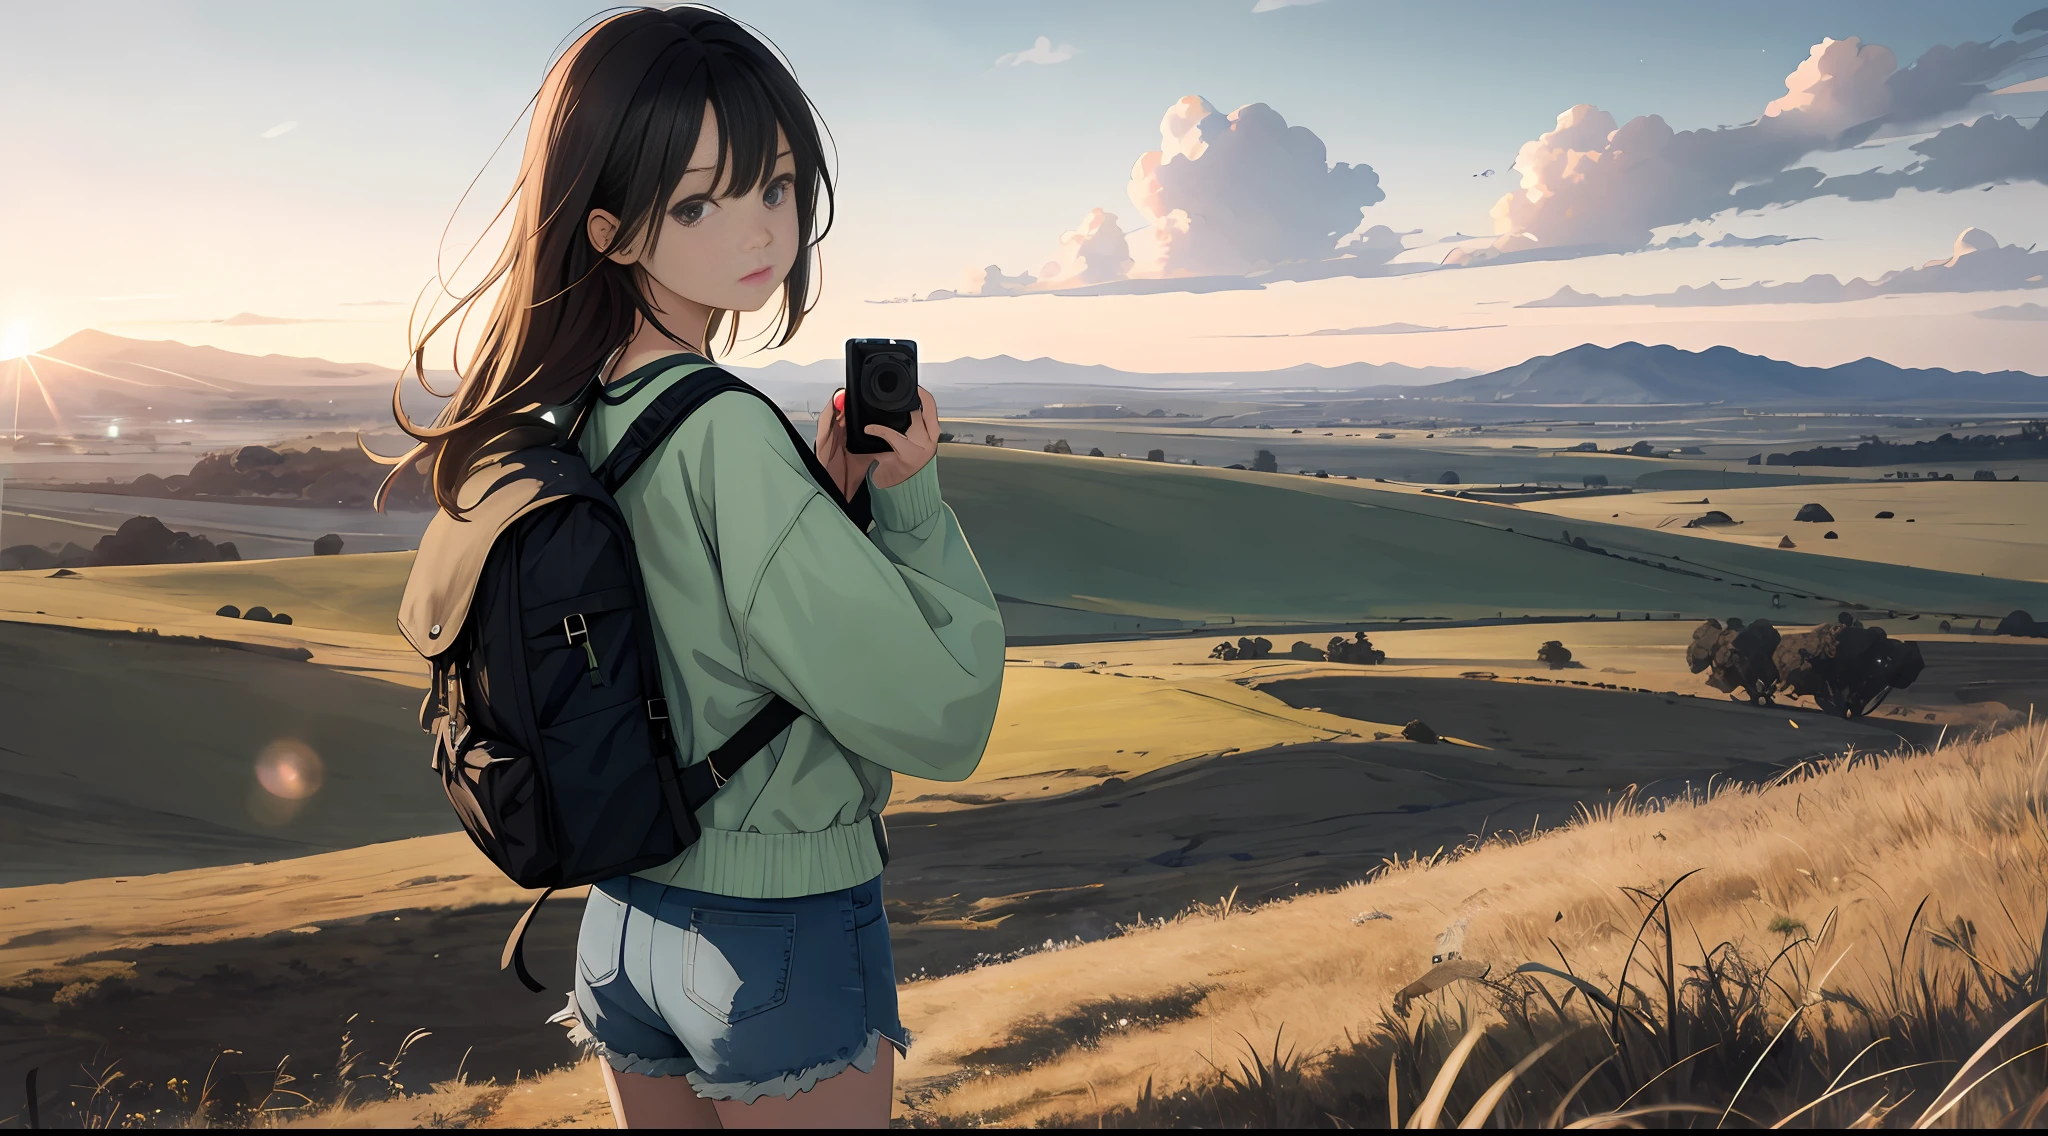 Vast sky, beautiful skyline, wide grasslands, very tense and dramatic pictures, moving visual effects, hanging high Polaris, colorful natural glare. Girl with camera, girl in long-sleeved top, denim shorts and side backpack depicting girl looking beyond small in the center